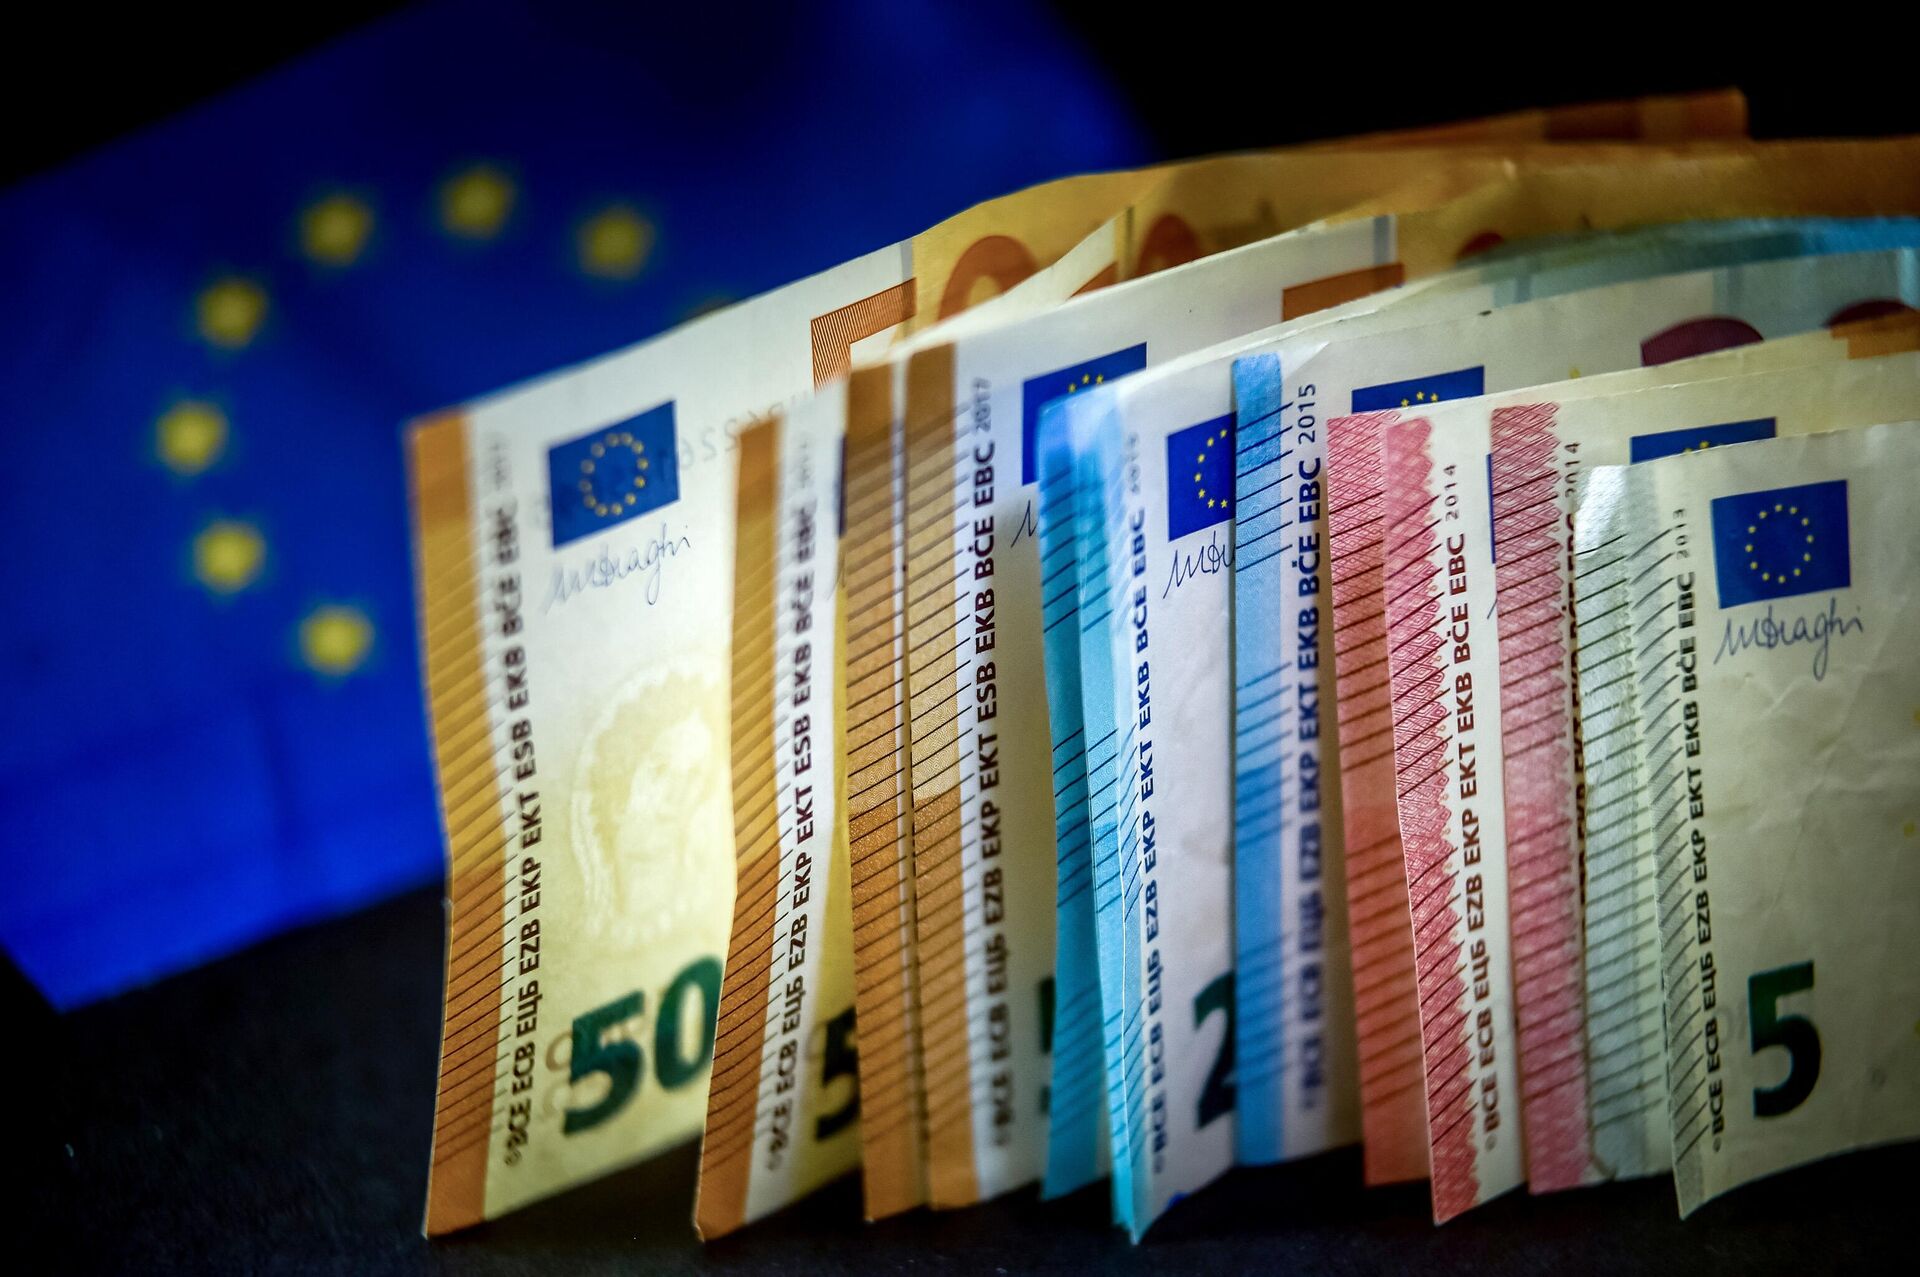 Euro banknotes are displayed next to an European Union flag, in Lille, on March 22, 2019 - Sputnik International, 1920, 24.11.2022